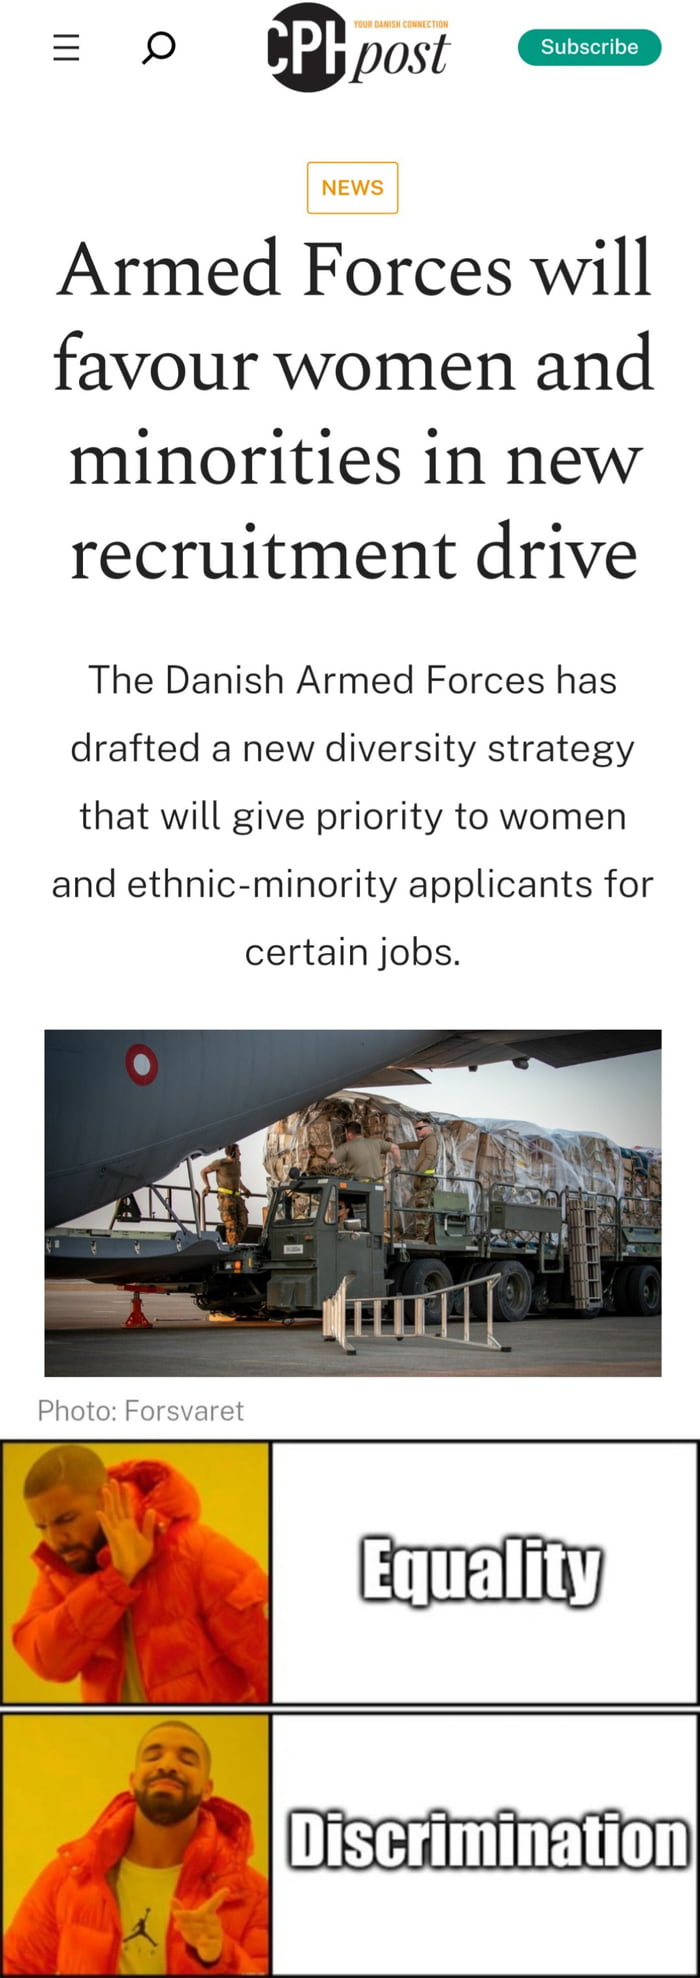 A suggestion from the Danish Army proposes to allow discrimi